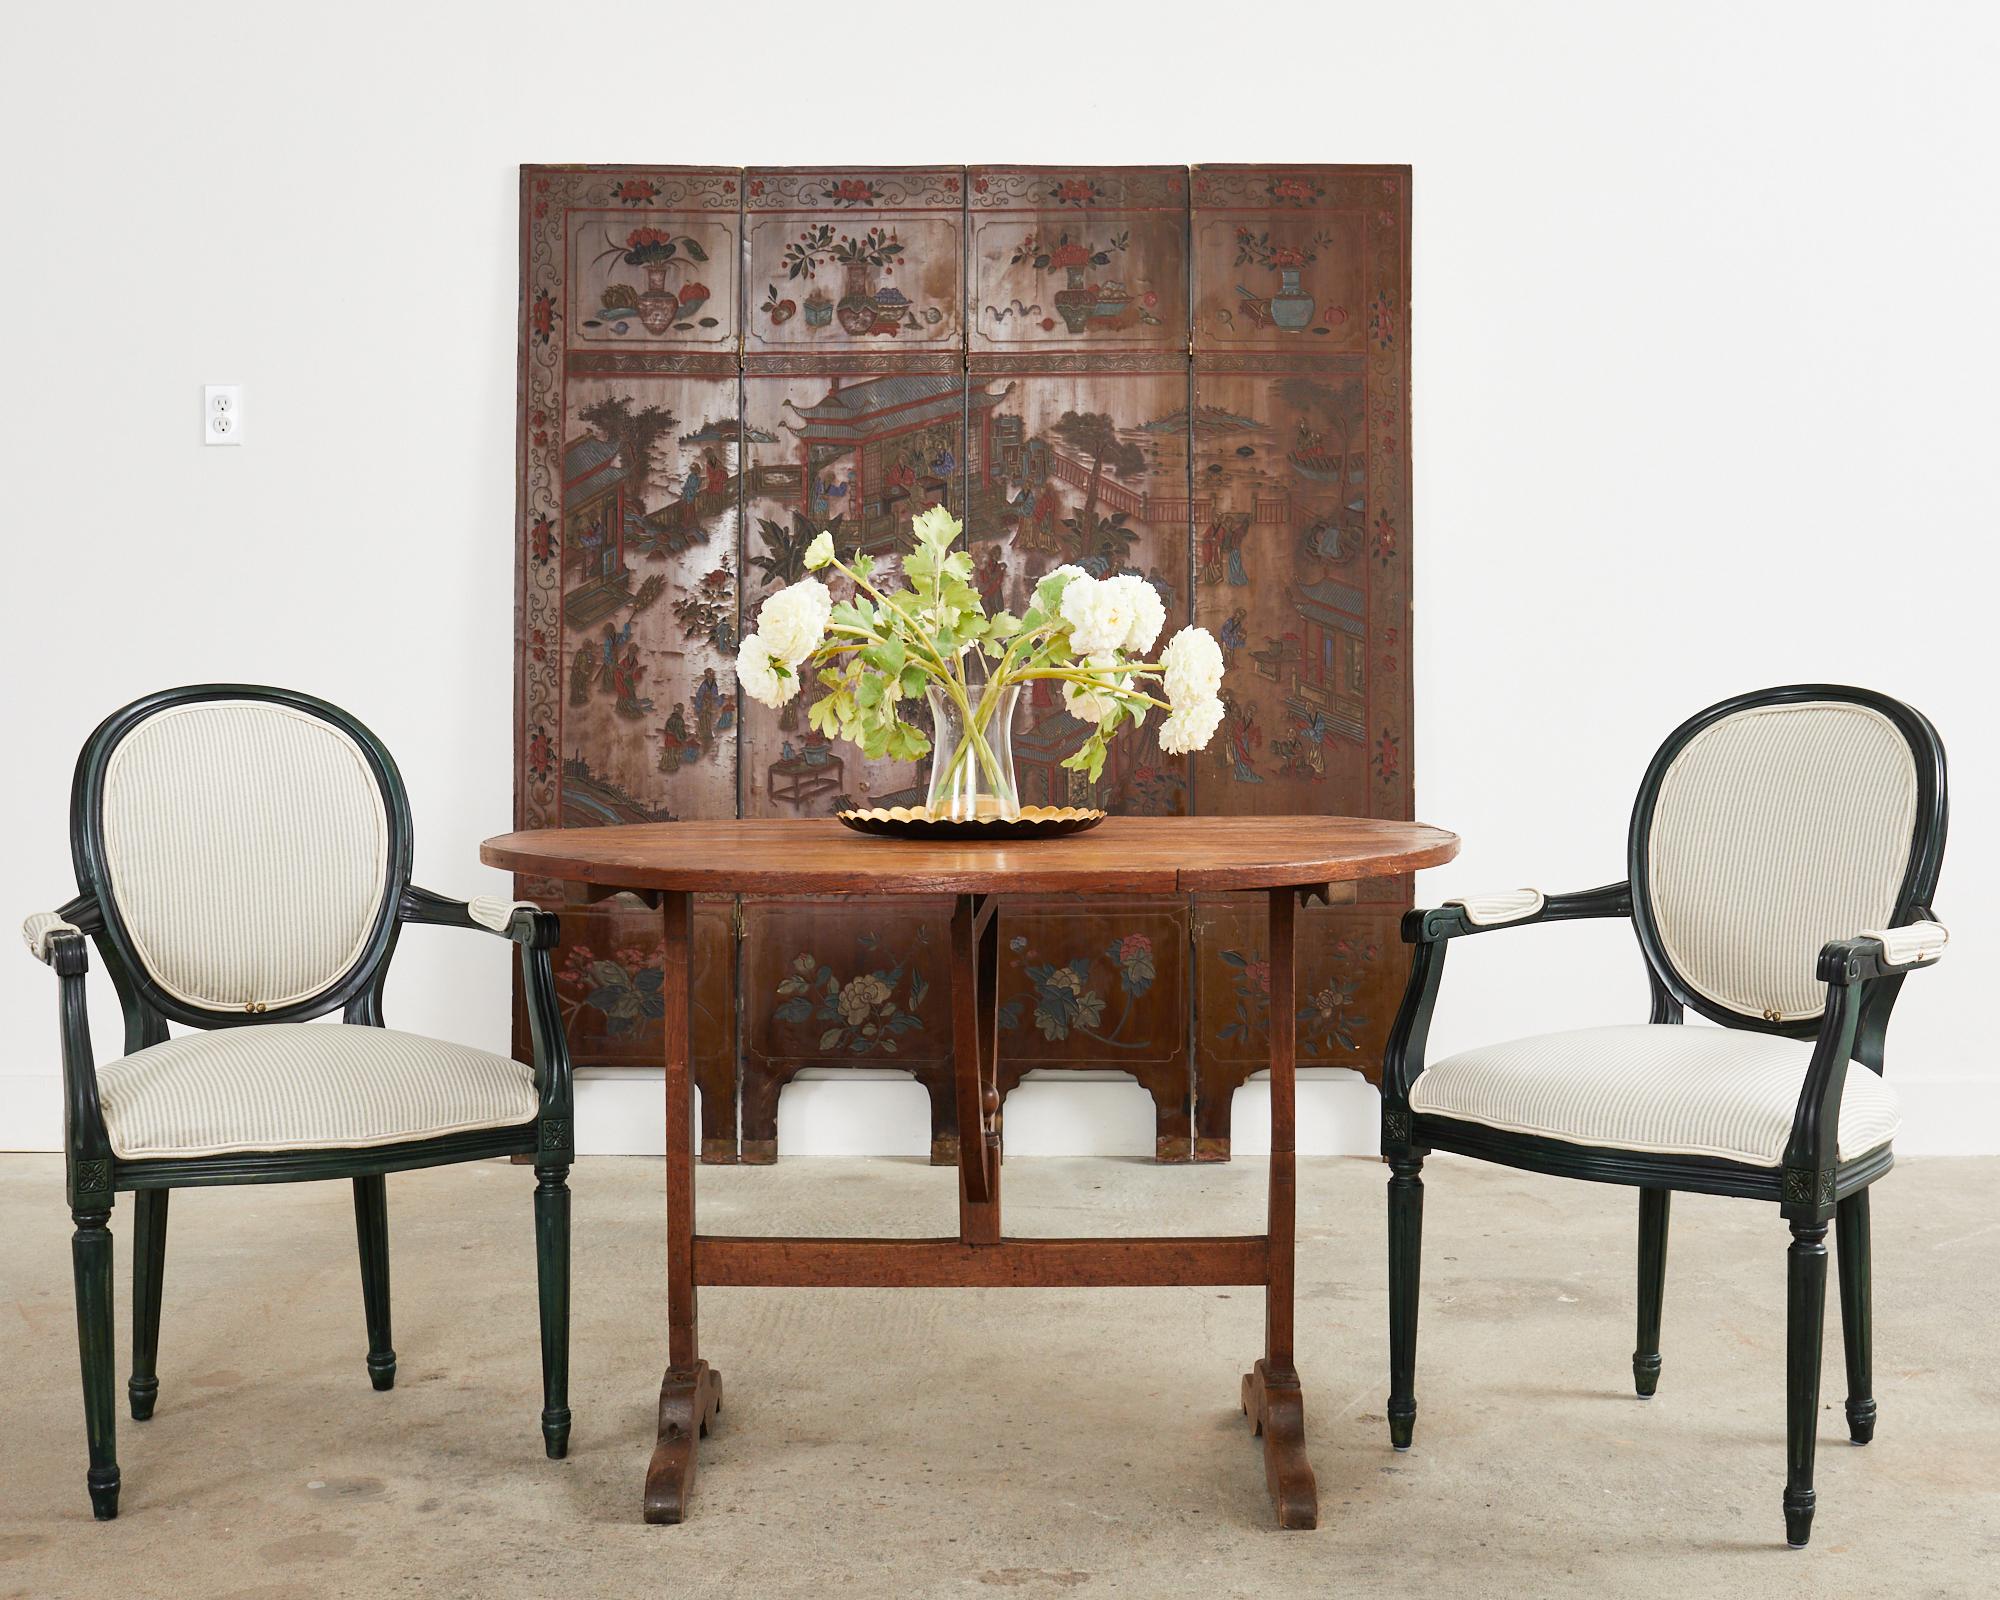 Beautifully weathered Chinese export four-panel coromandel screen decorated on both sides. The screen features a pavilion landscape on one side and a floral and fauna landscape on the reverse side. The panels are lacquered and faded with a desirable